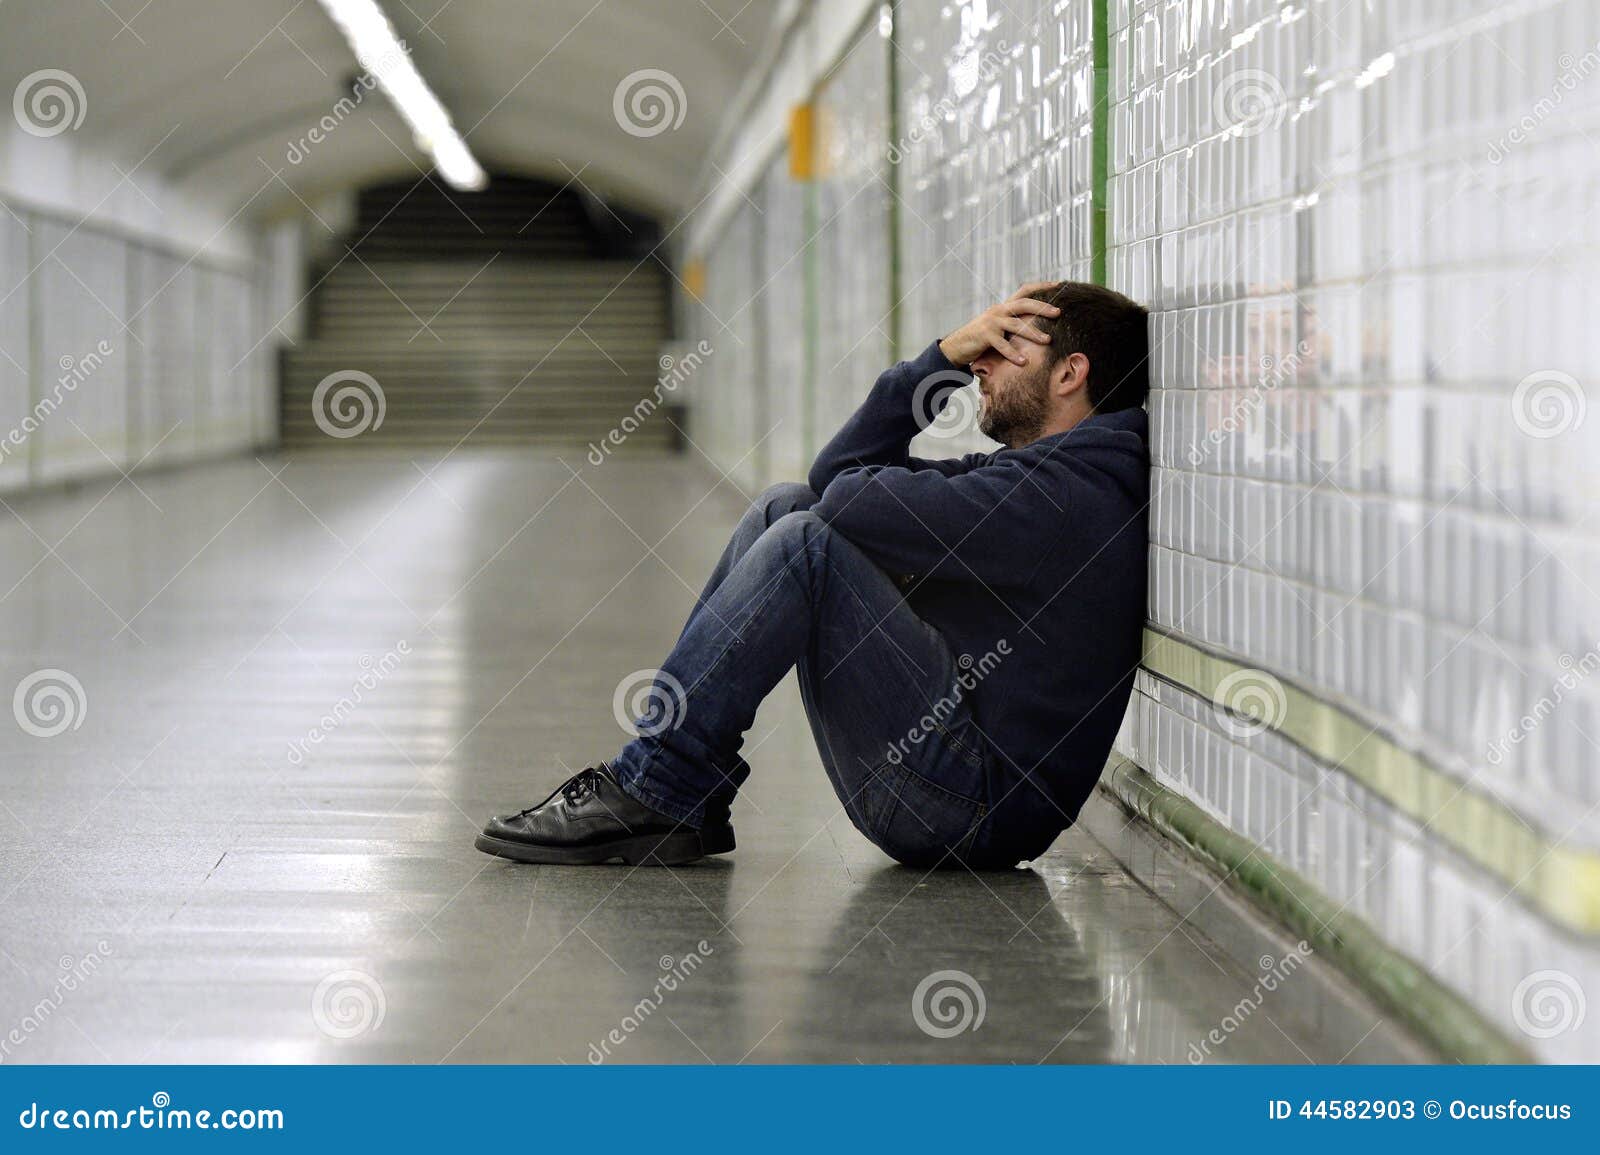 young sick man lost suffering depression sitting on ground street subway tunnel